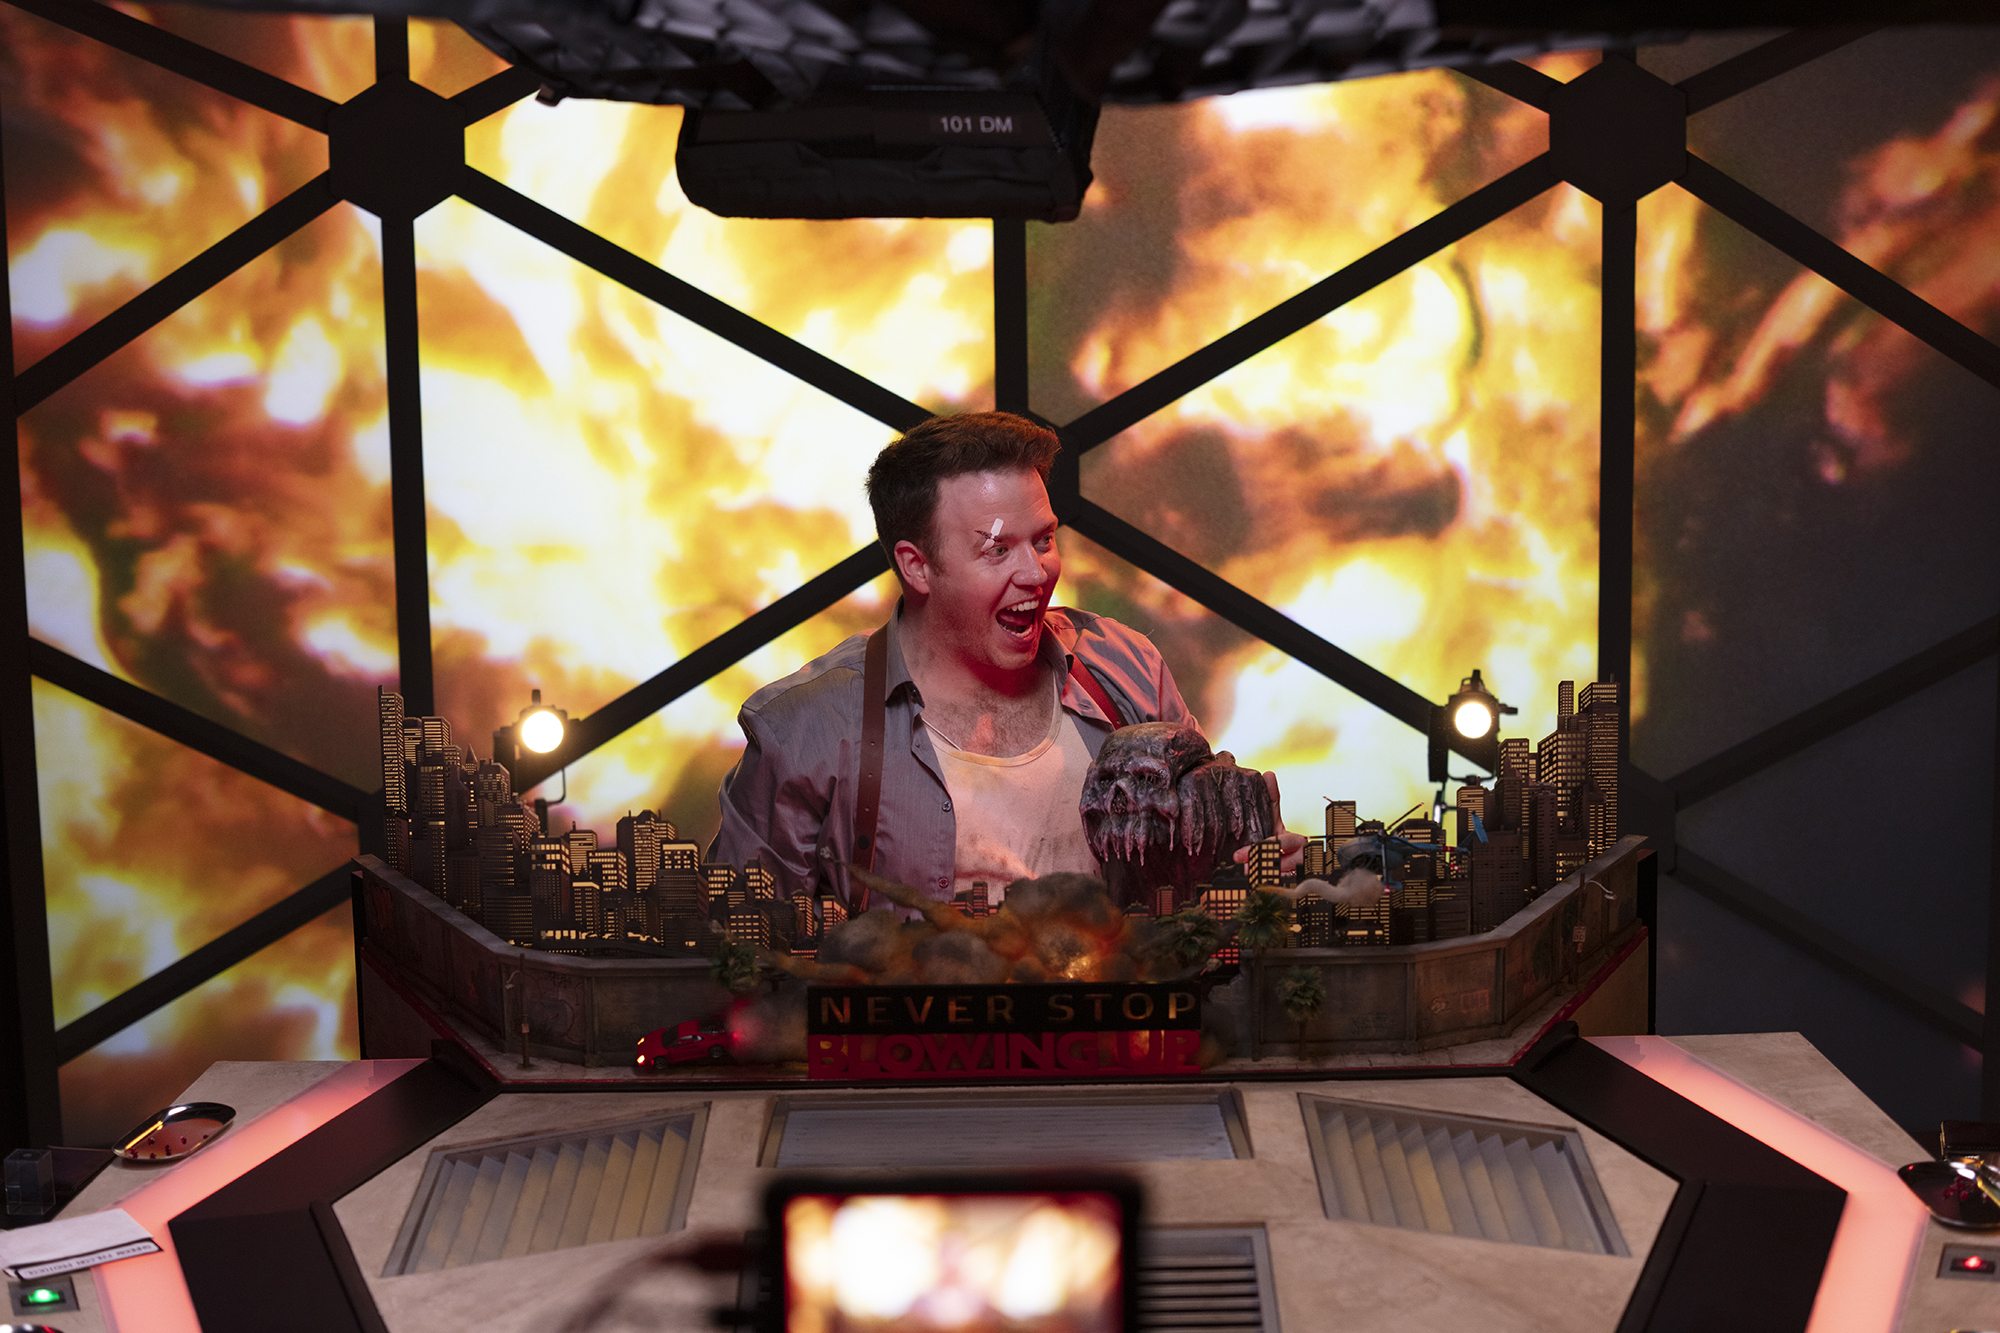 Brennan Lee Mulligan screams in the Game Master seat of the Dimension 20 dome. He’s wearing dirty clothes and has a bandaid on his face, and the screens behind him are showing a huge fiery explosion in Never Stop Blowing Up.